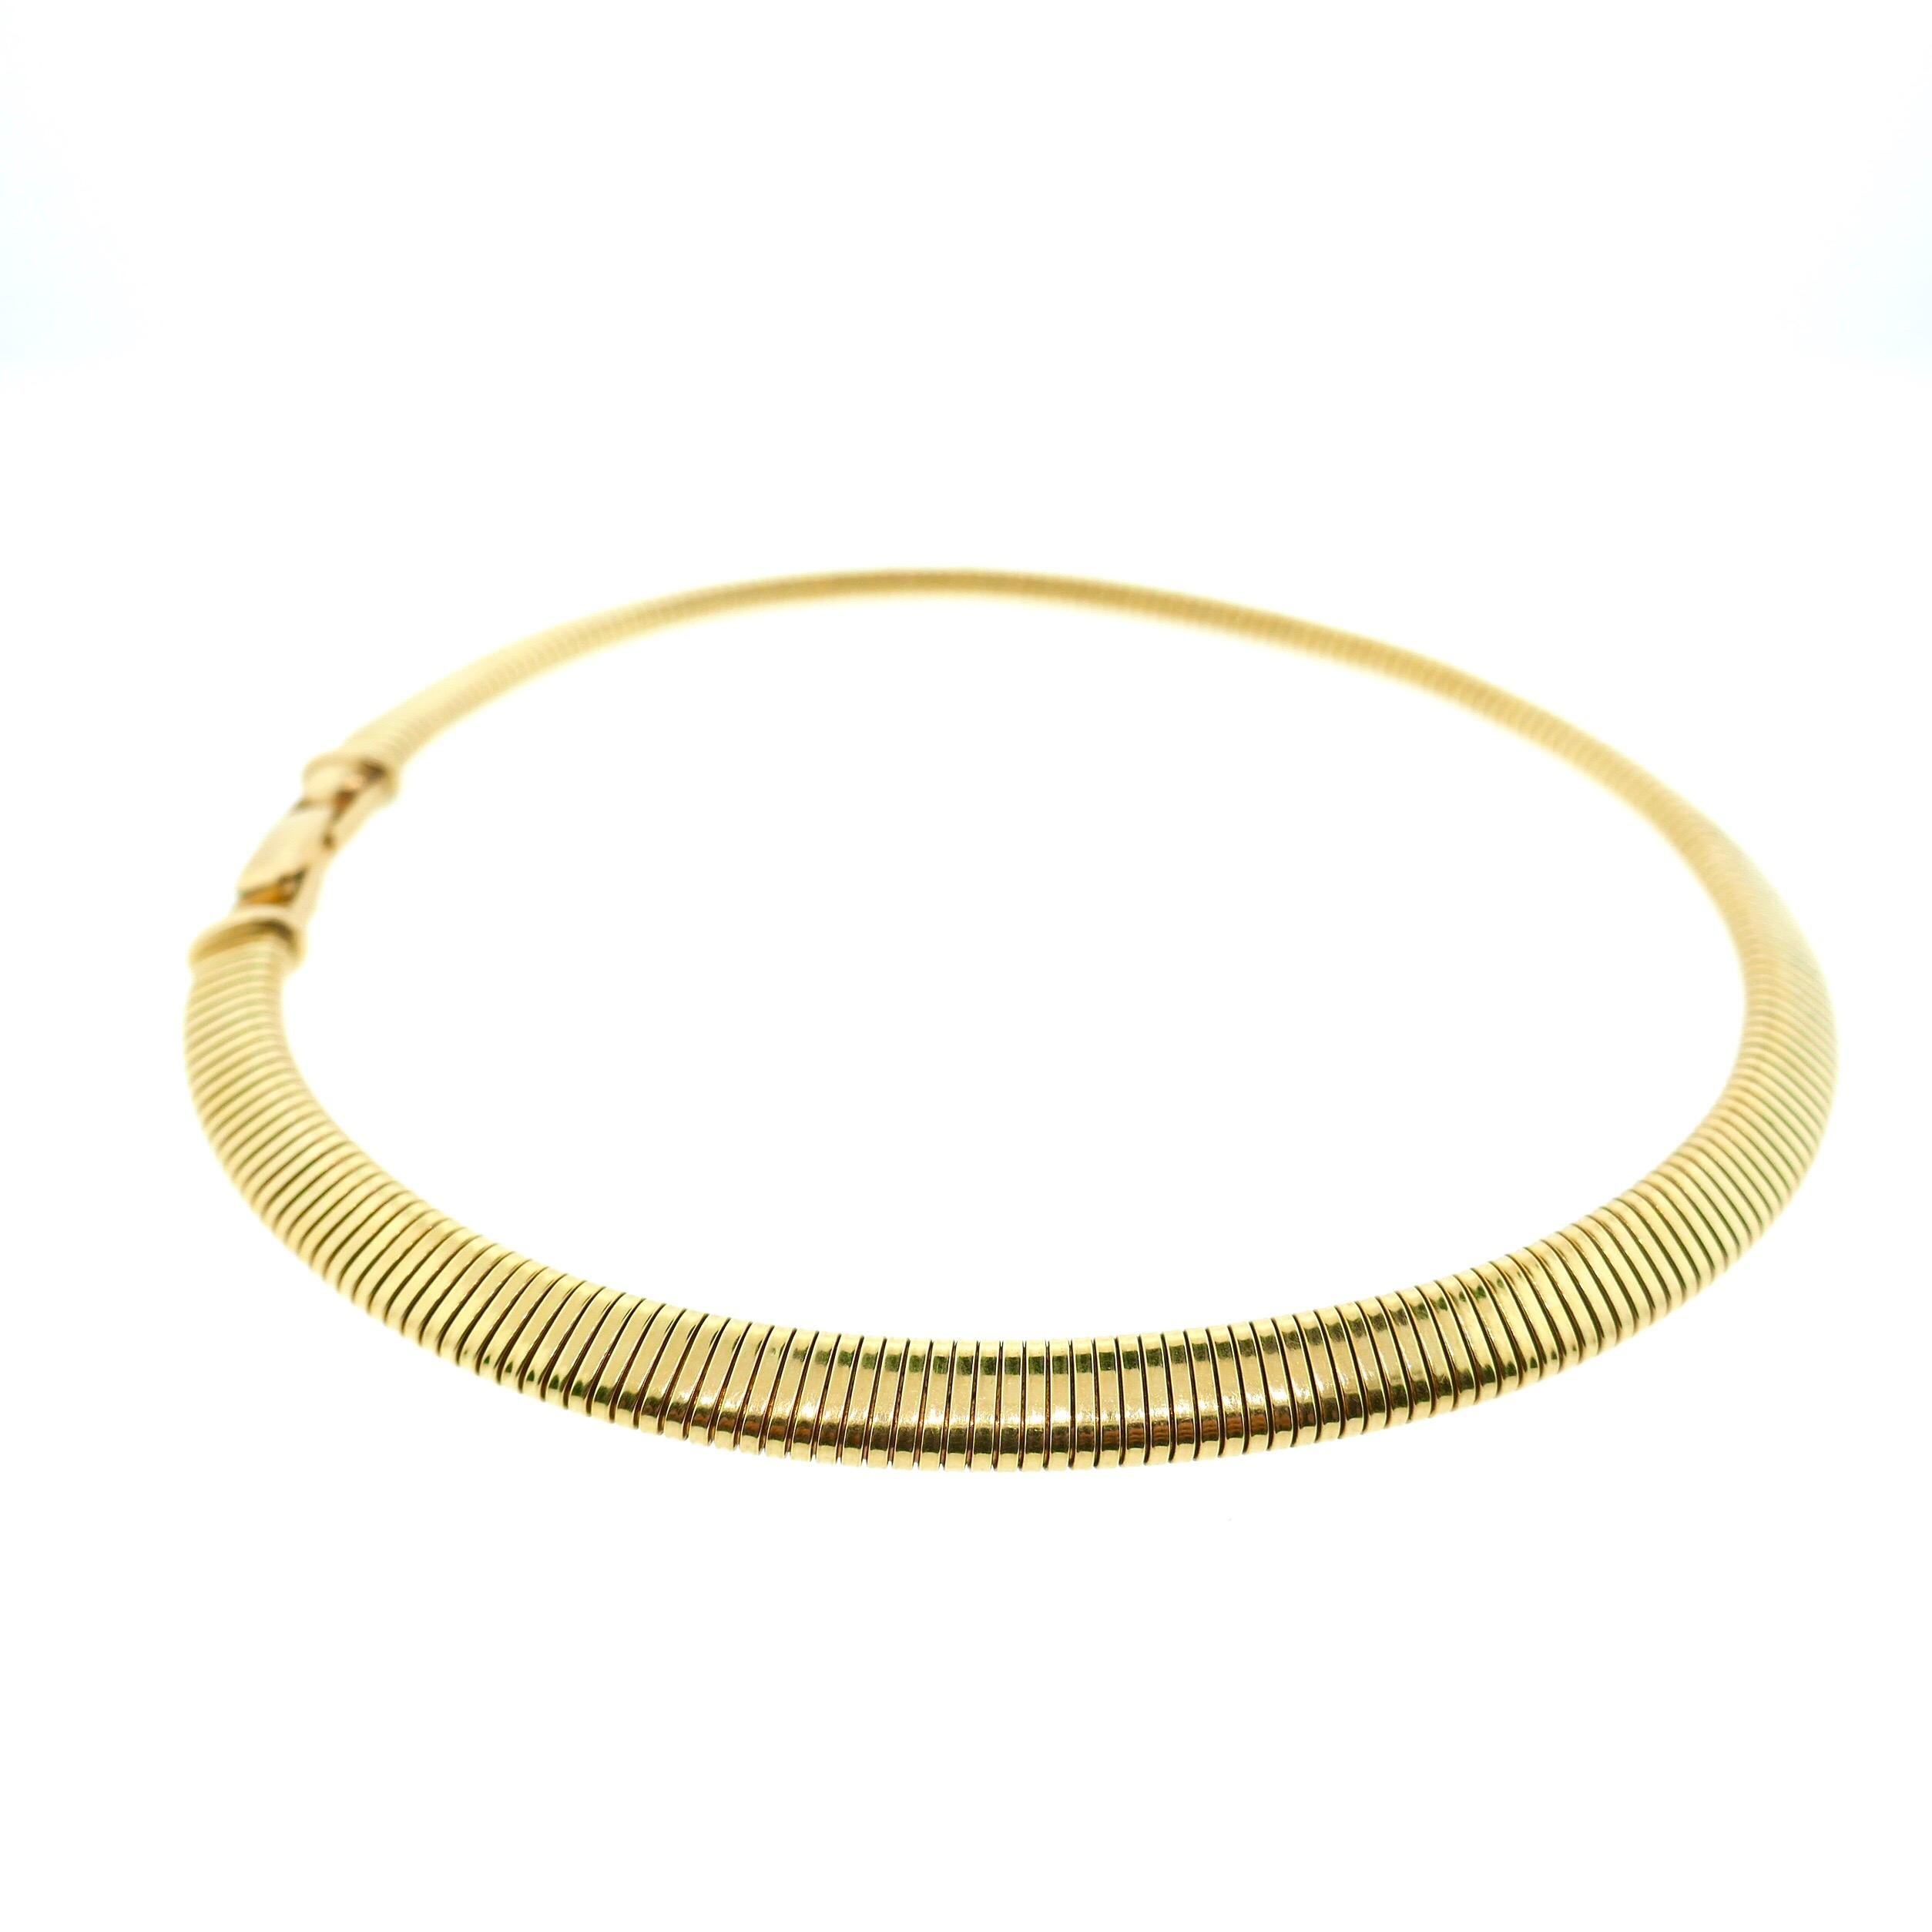 Tiffany & Co. 14 Karat Yellow Gold Tubogas Necklace

This Tiffany necklace is classic Tiffany! It is done in the iconic tubogas style and features. Truly a great piece at a great price! 

Dimension: 16